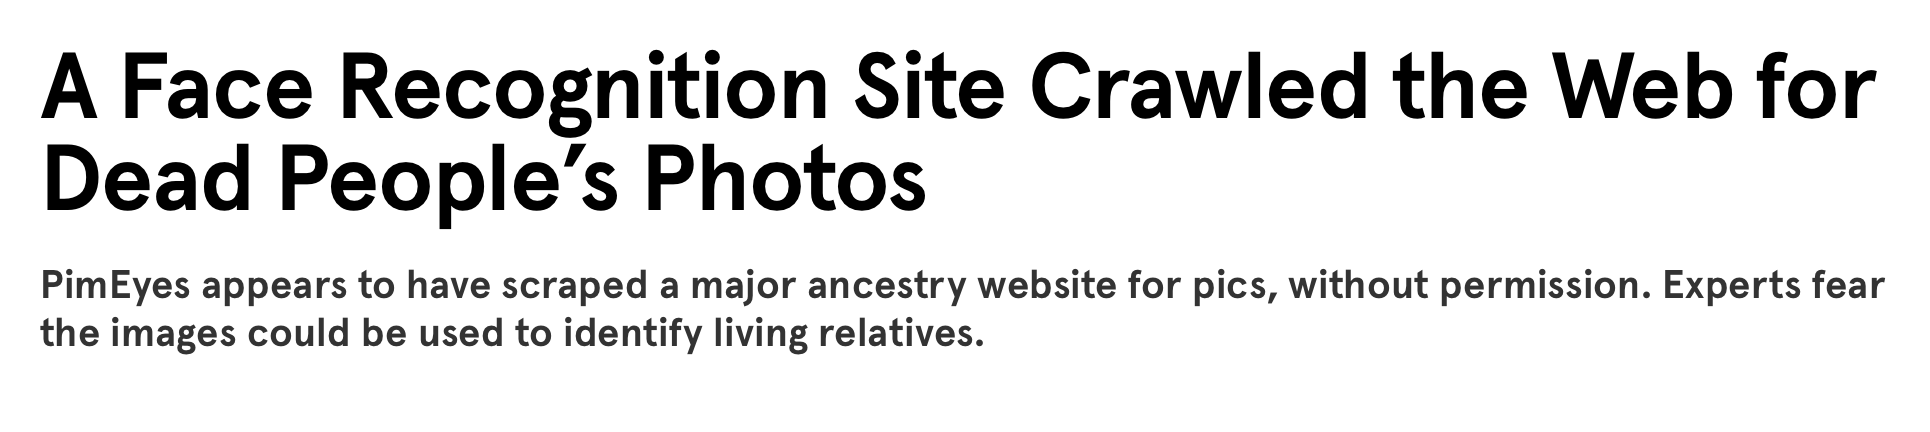 https://www.wired.com/story/a-face-recognition-site-crawled-the-web-for-dead-peoples-photos/